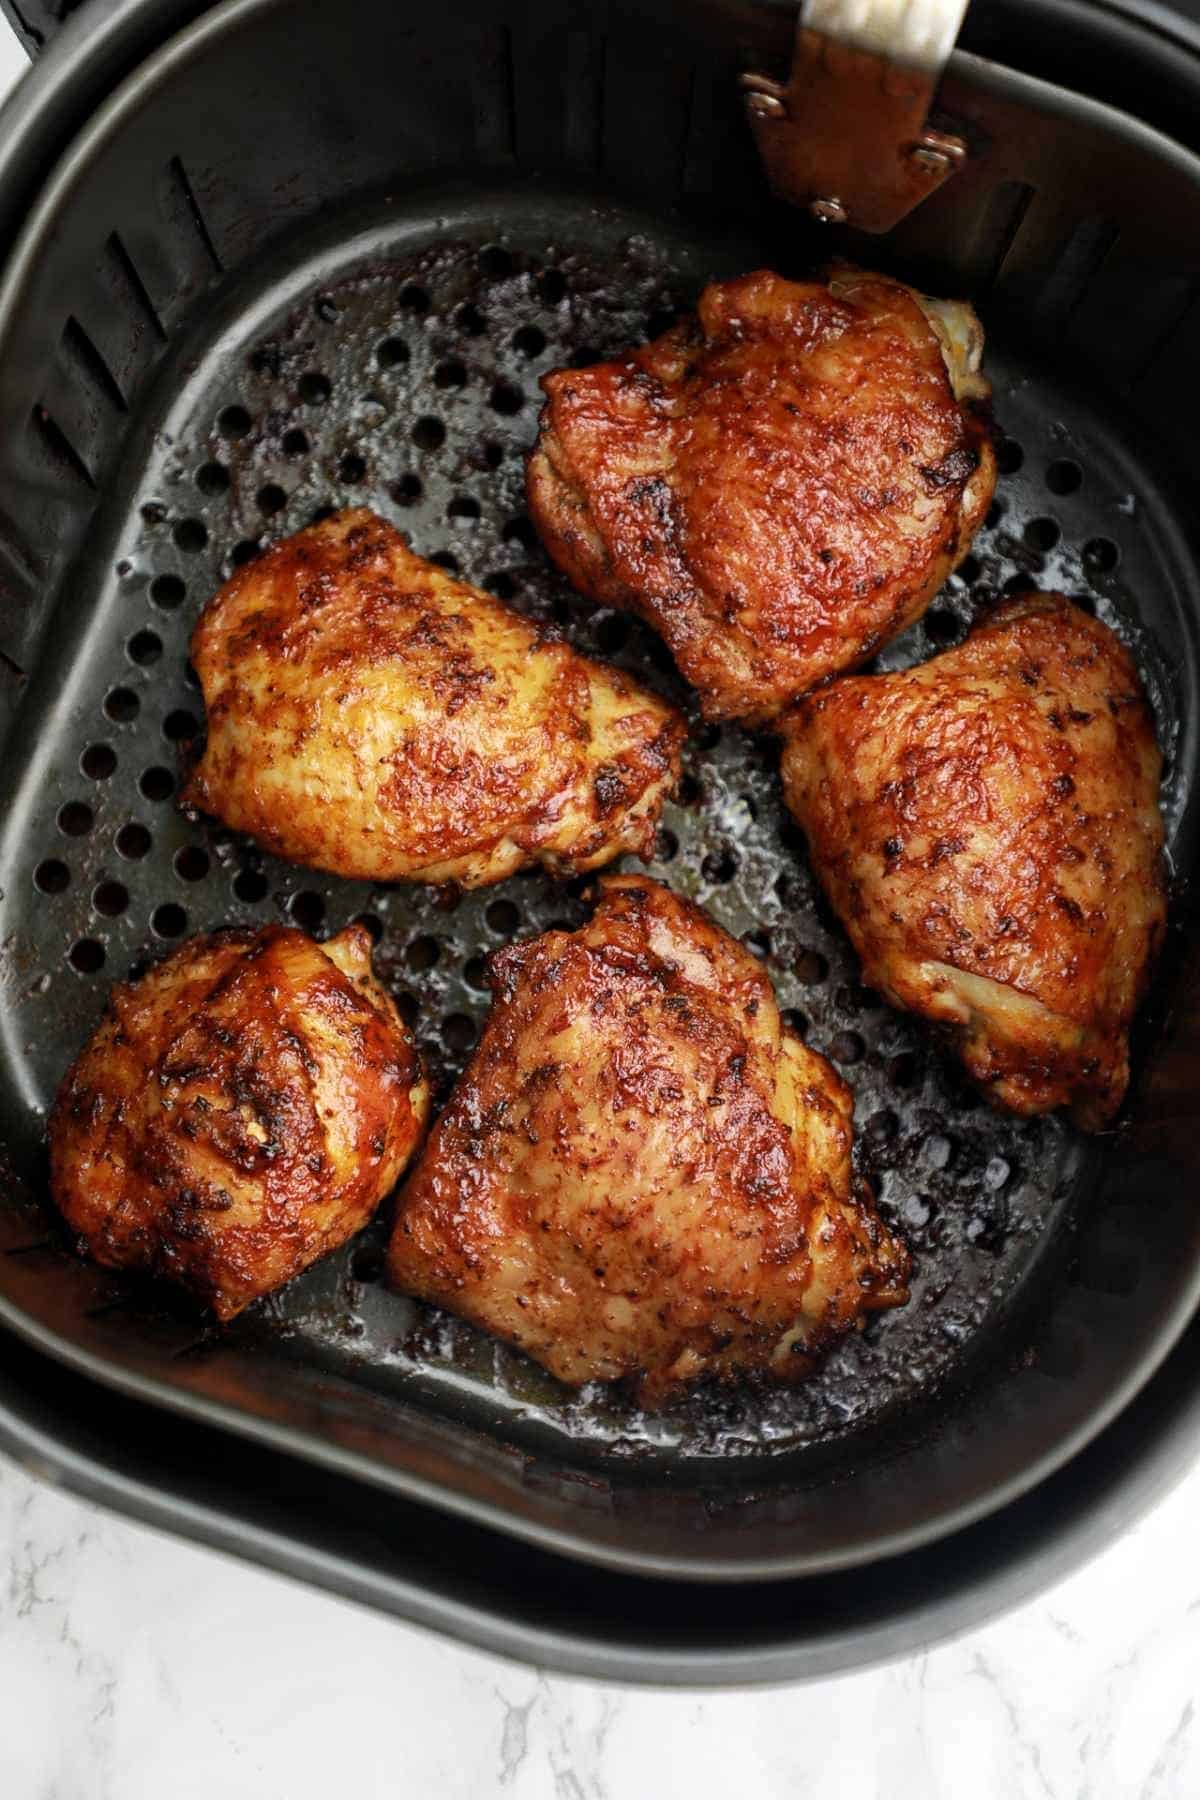 thighs brushed with bbq sauce in air fryer basket.